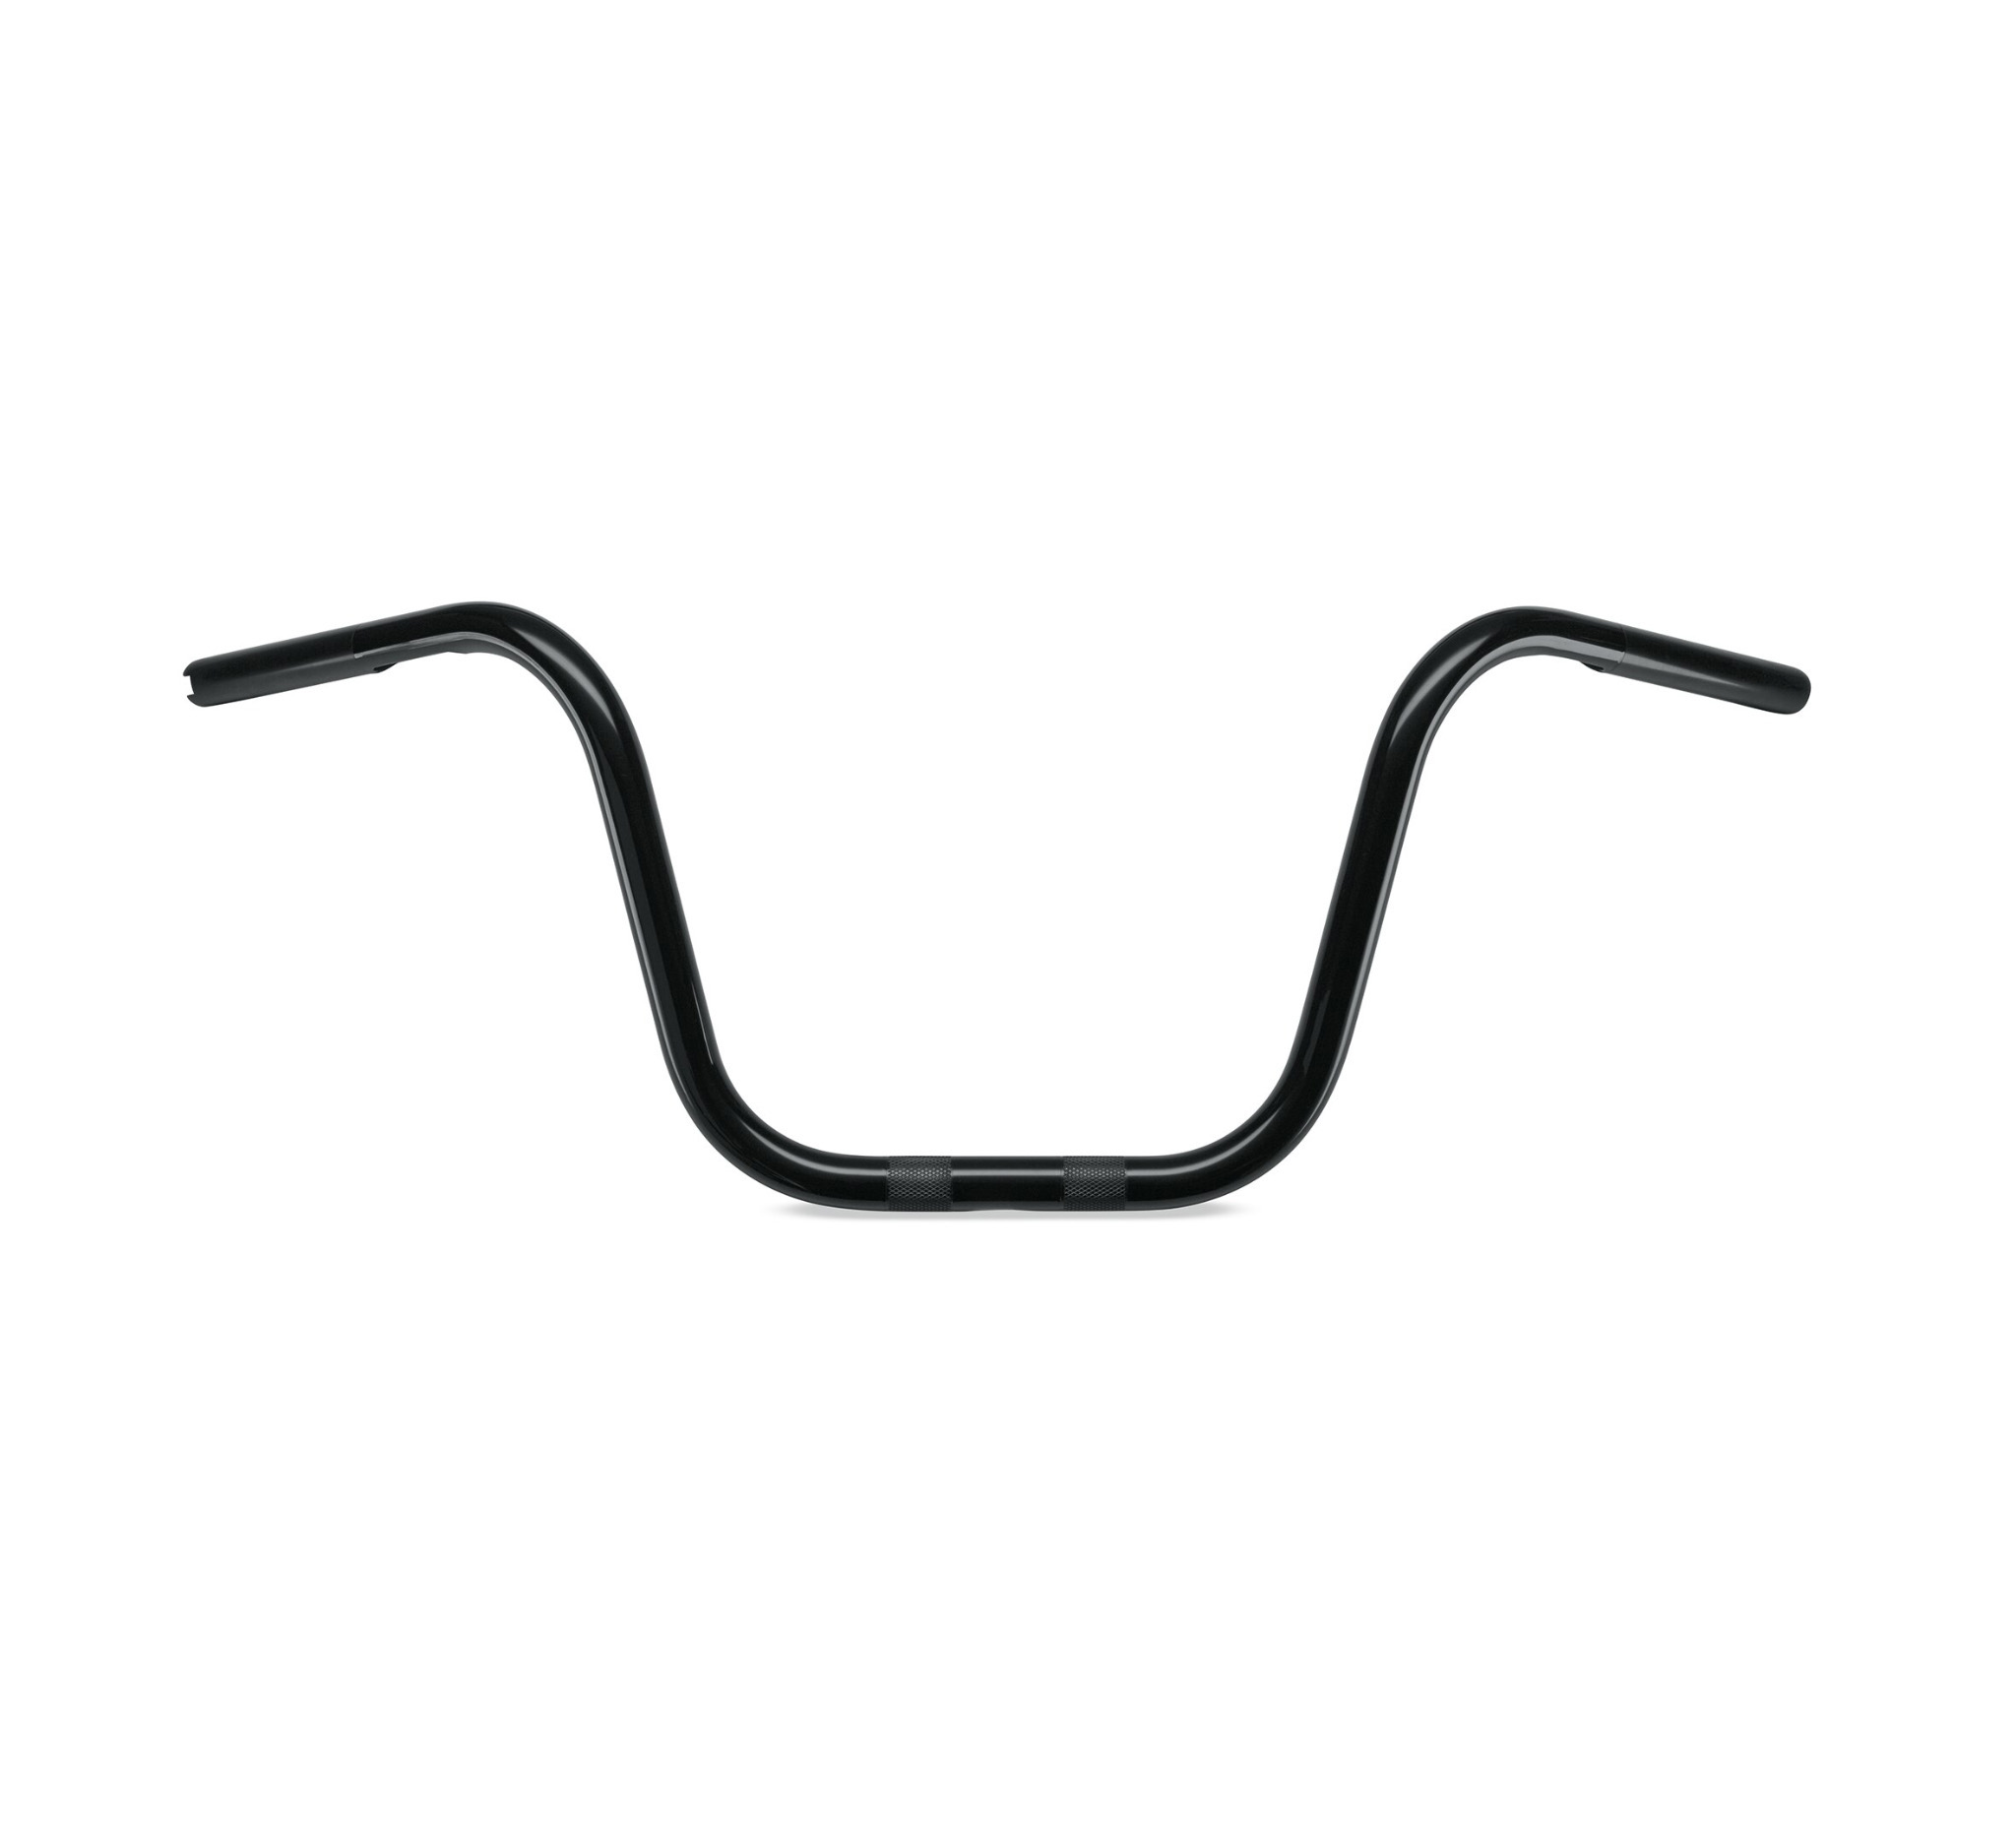 Plastic Hangers HD Heavy Duty, 16 Pcs. Black Color, Made in USA